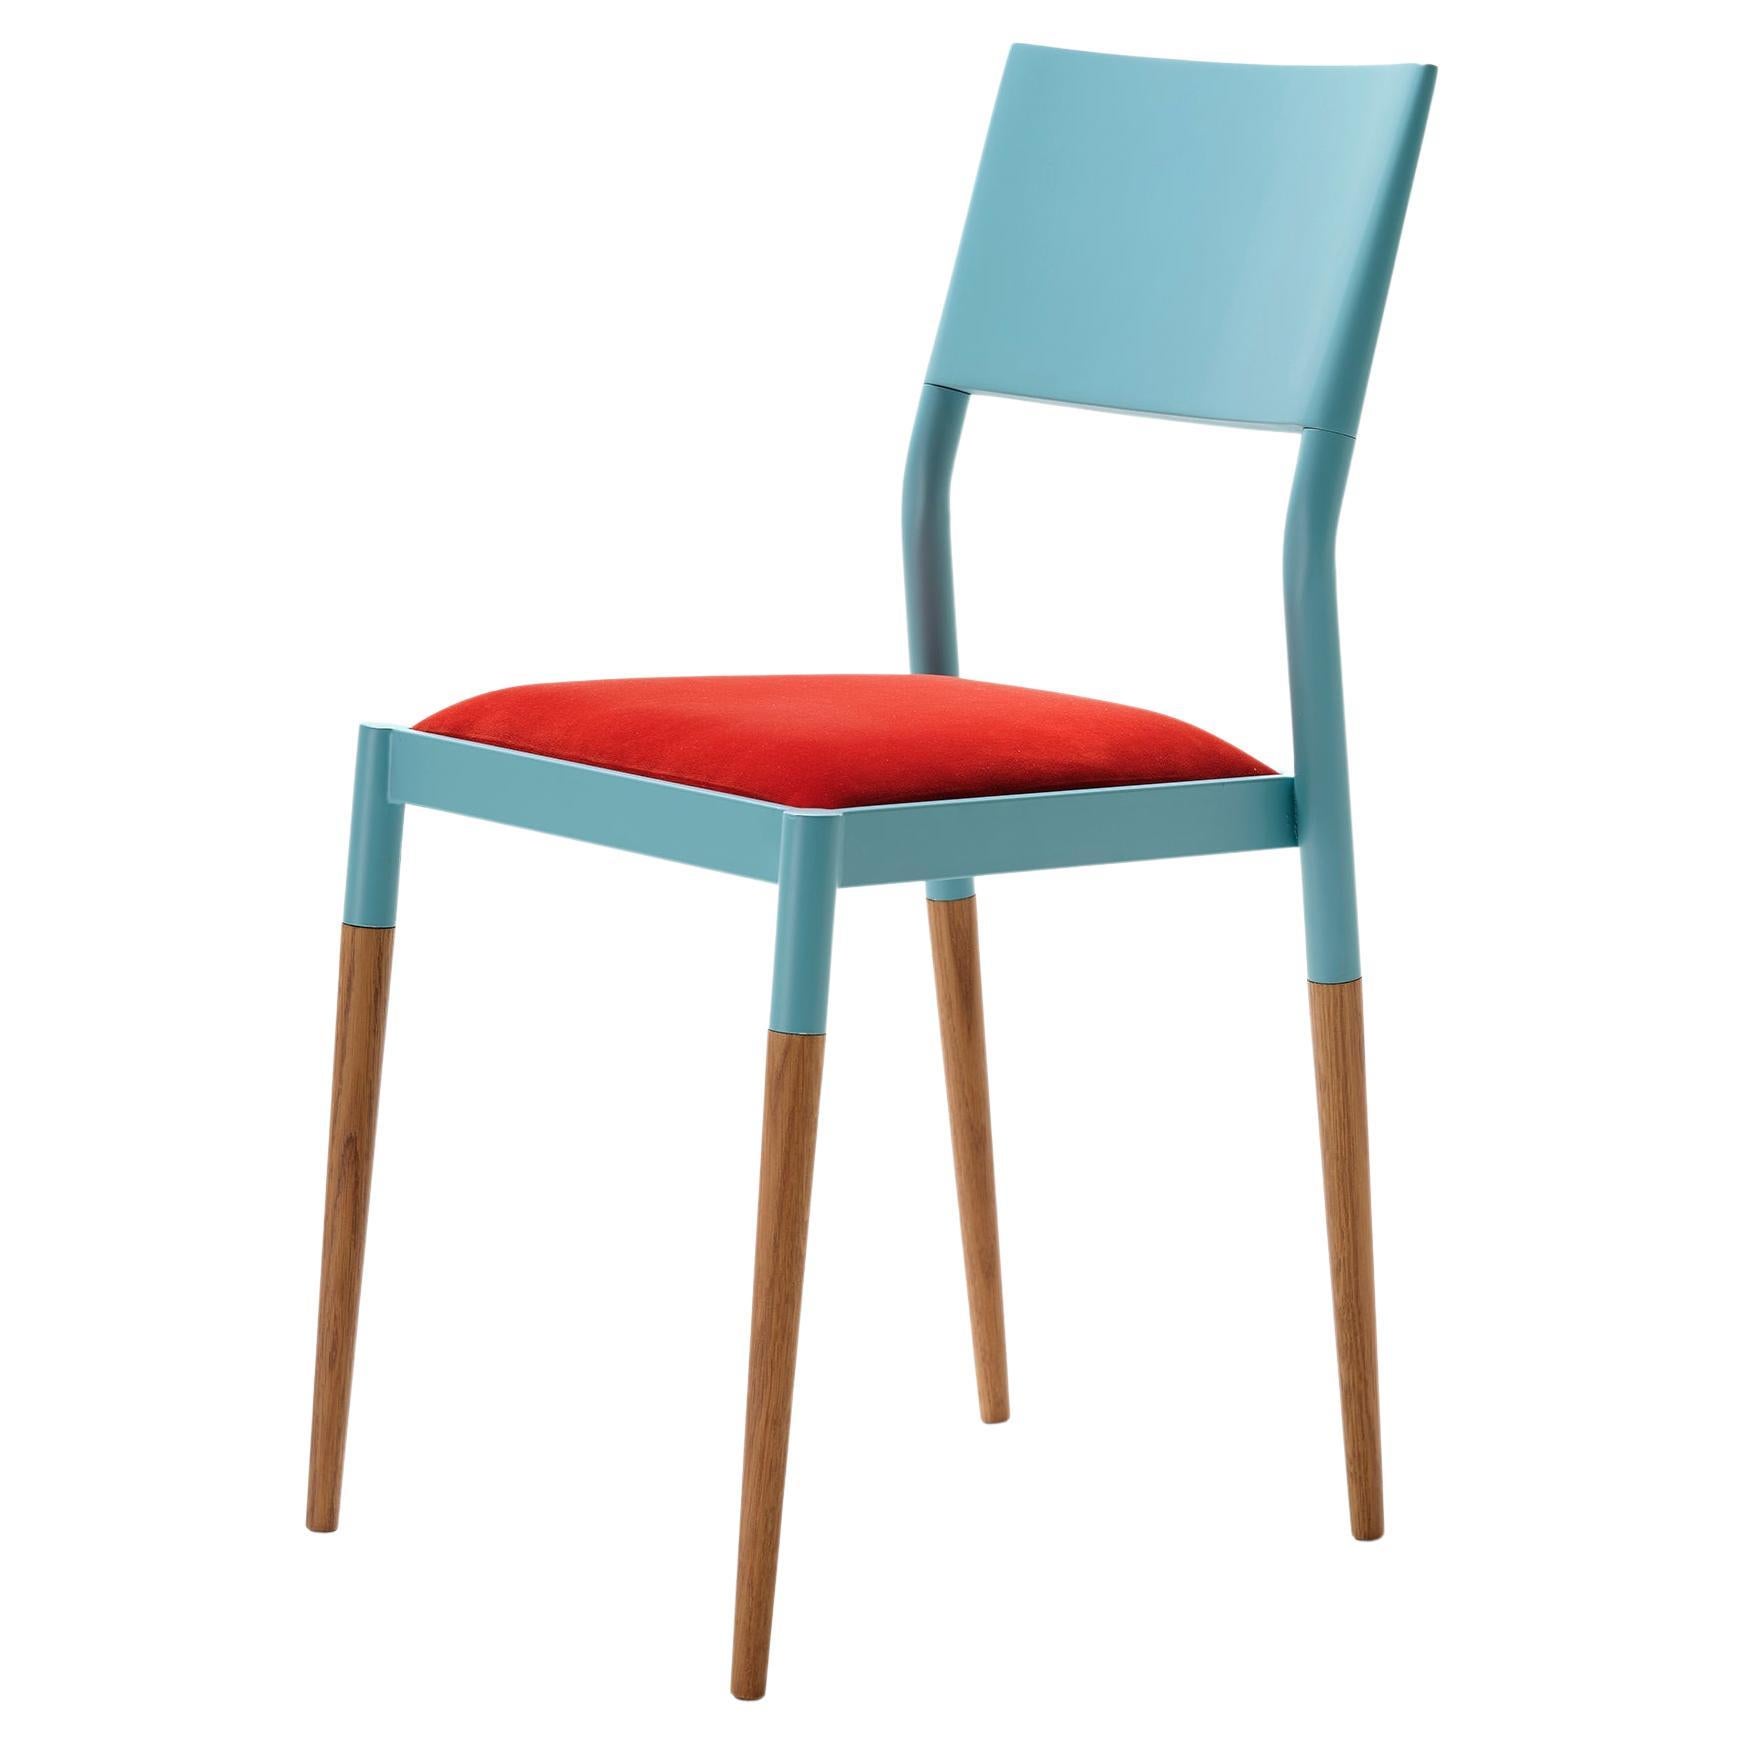 21st Century Modern Steel And Wood Chair With Velvet Upholstered Seat